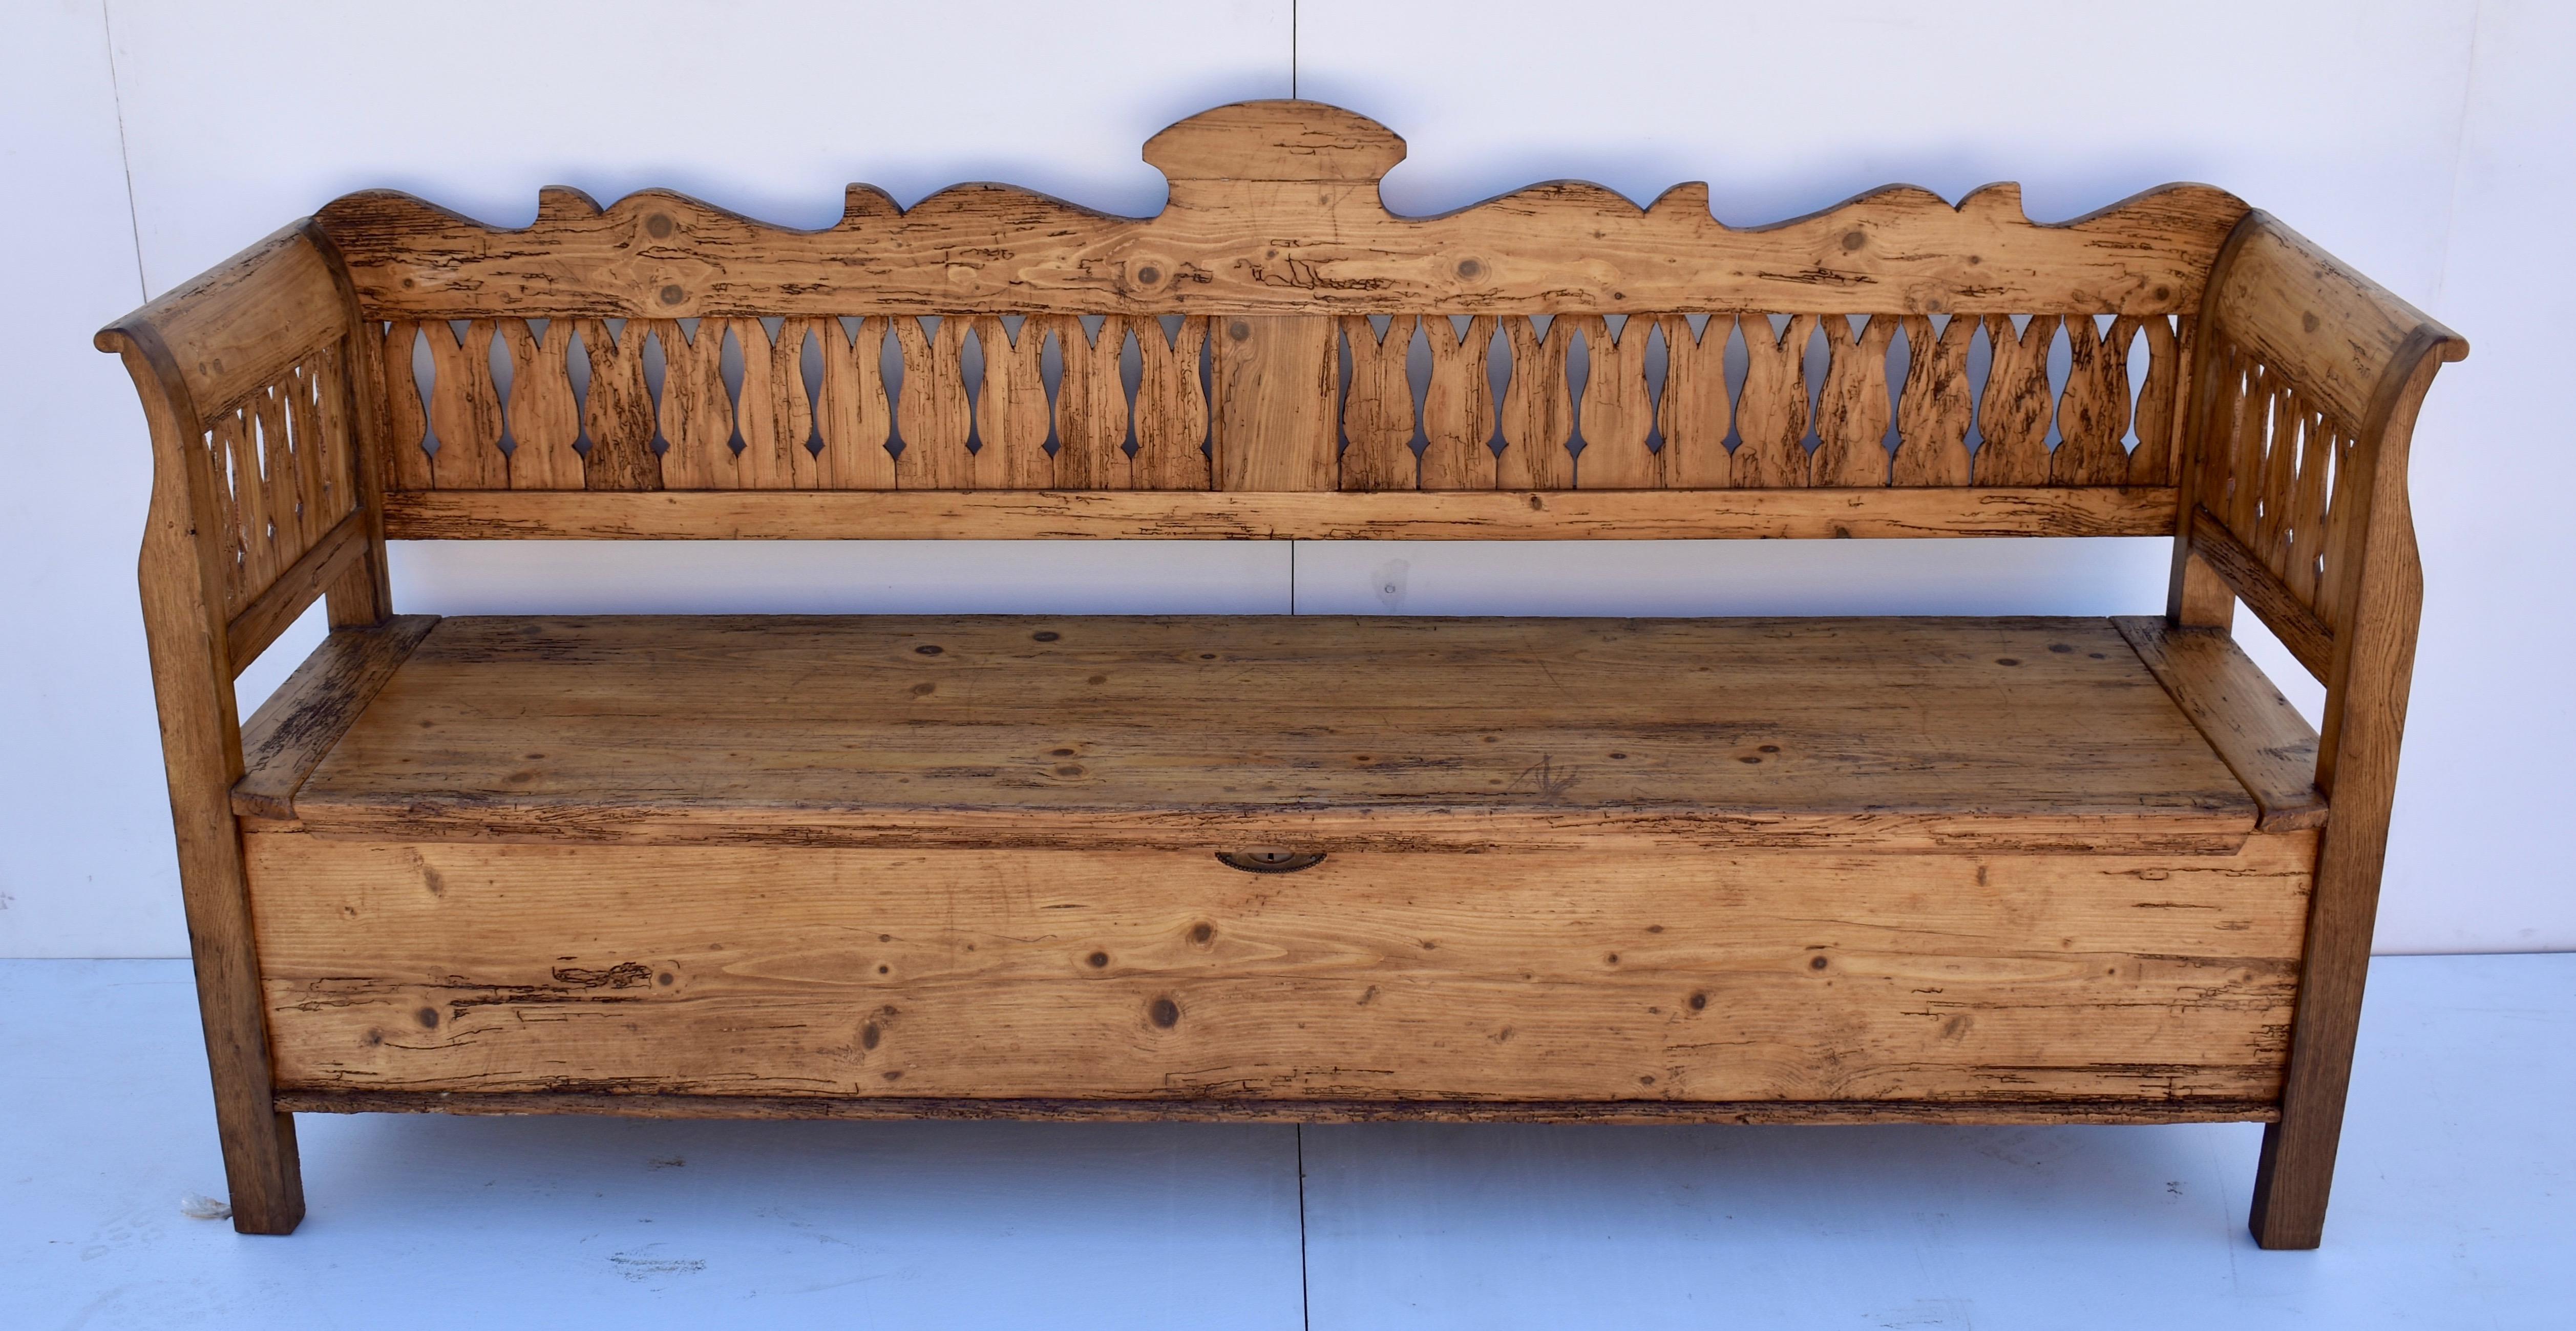 This stately pine and oak storage bench has a boldly scalloped back rail with a crest in the center. Pine splats run along the whole back, and the sides, where they are framed in the oak that comprises the integral arms and legs. The seat lifts to a